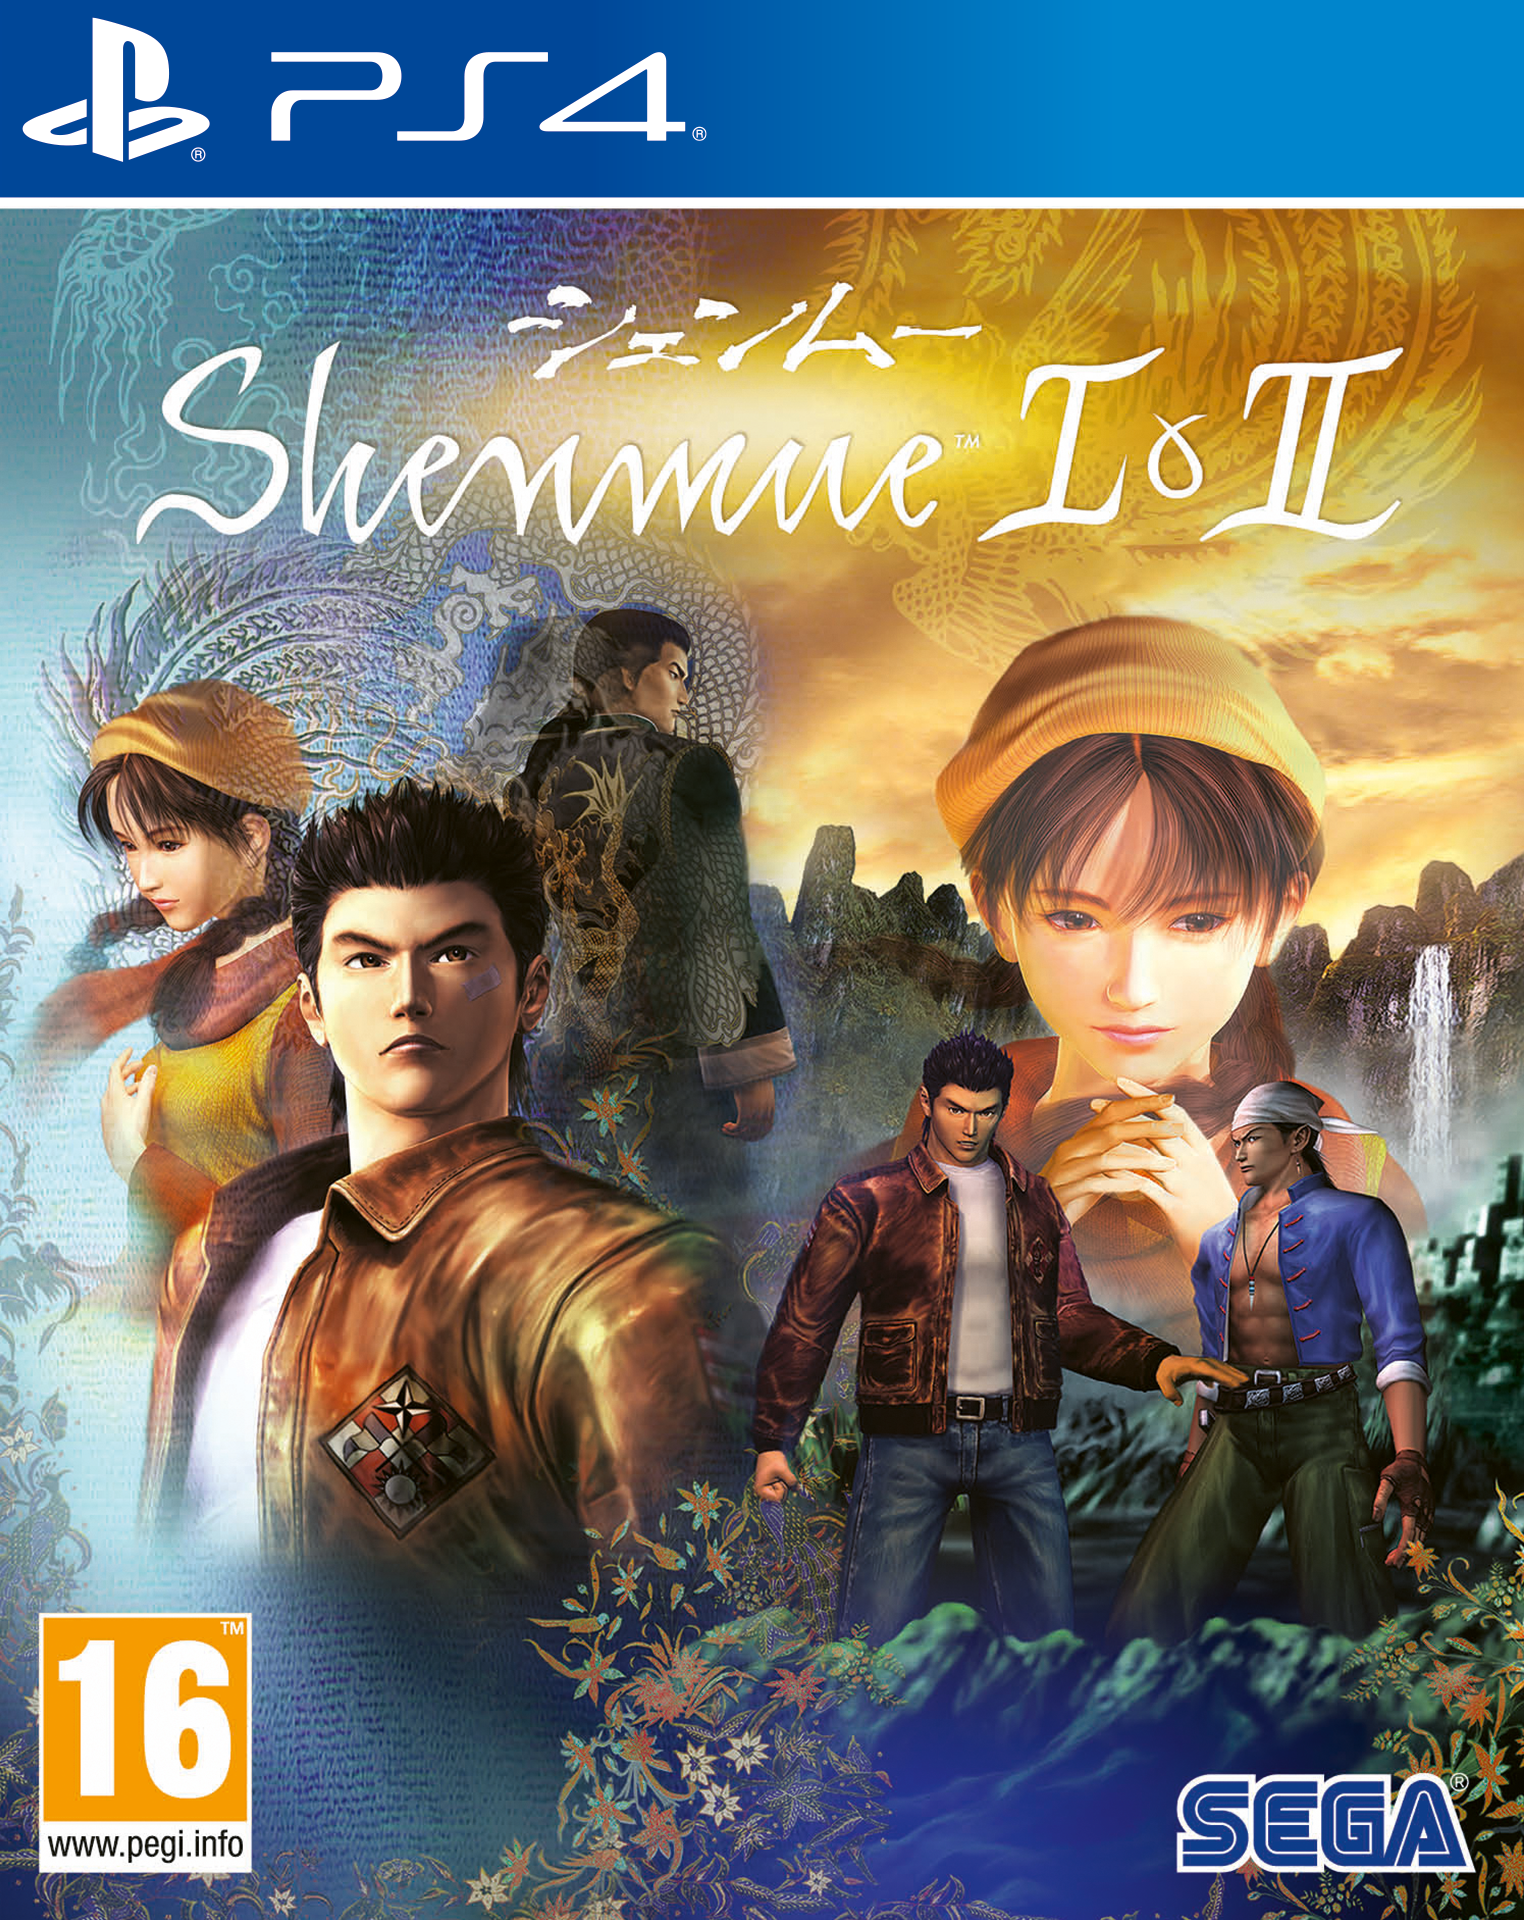 Shenmue 1 + 2 Pack